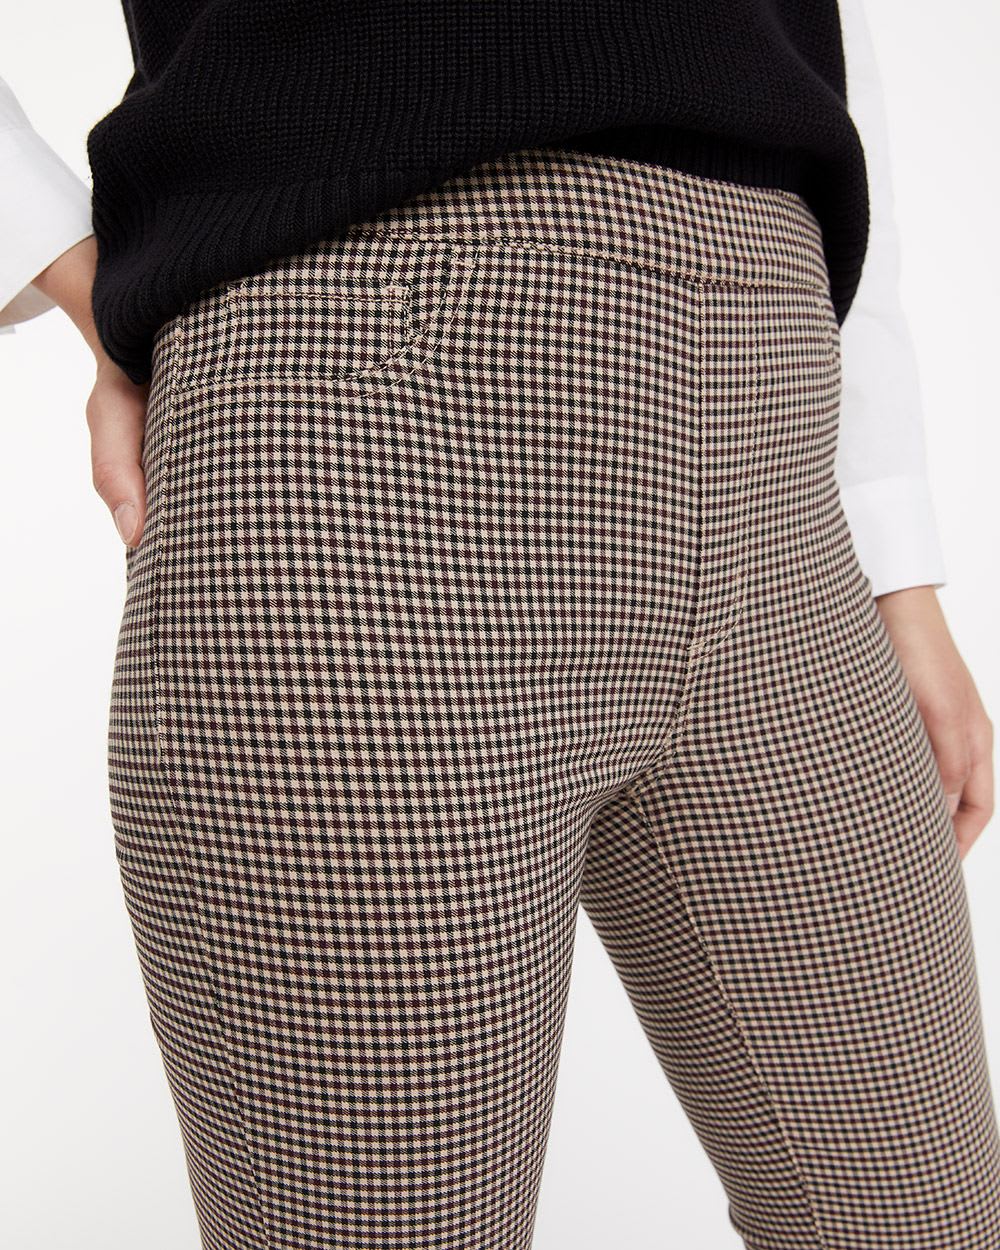 Gingham Print Legging with Pockets, The Iconic - Petite